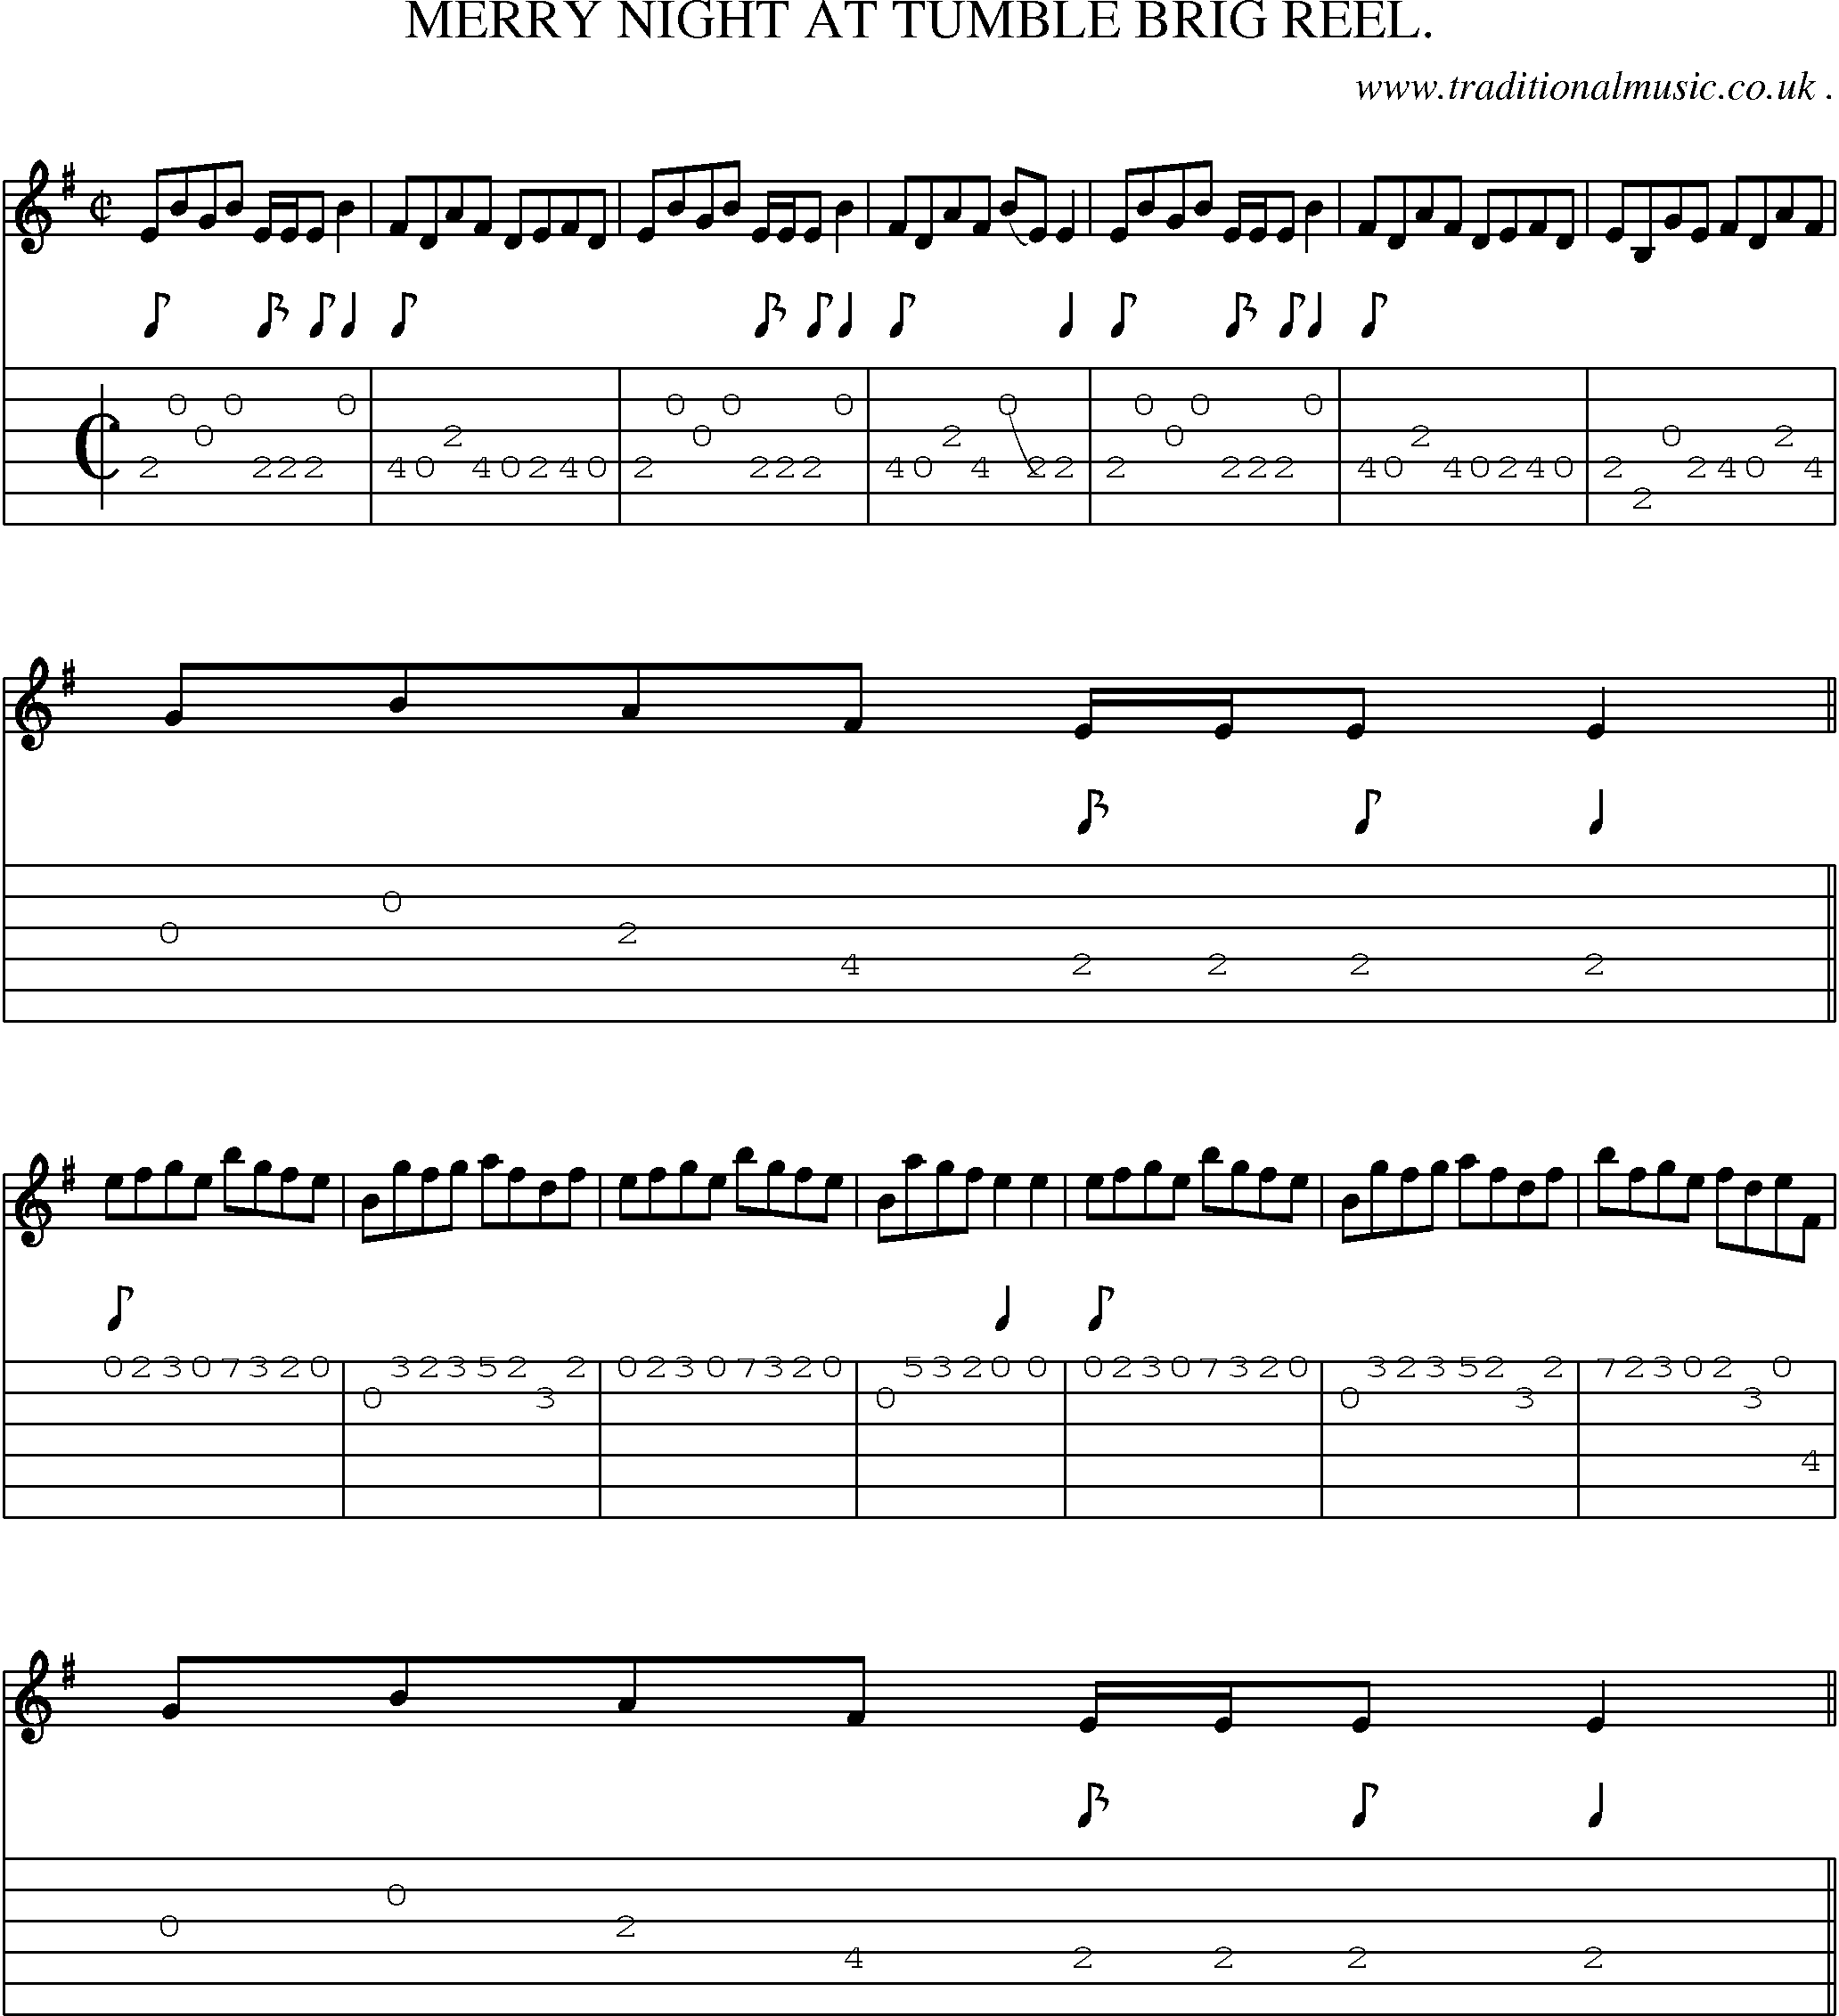 Sheet-Music and Guitar Tabs for Merry Night At Tumble Brig Reel